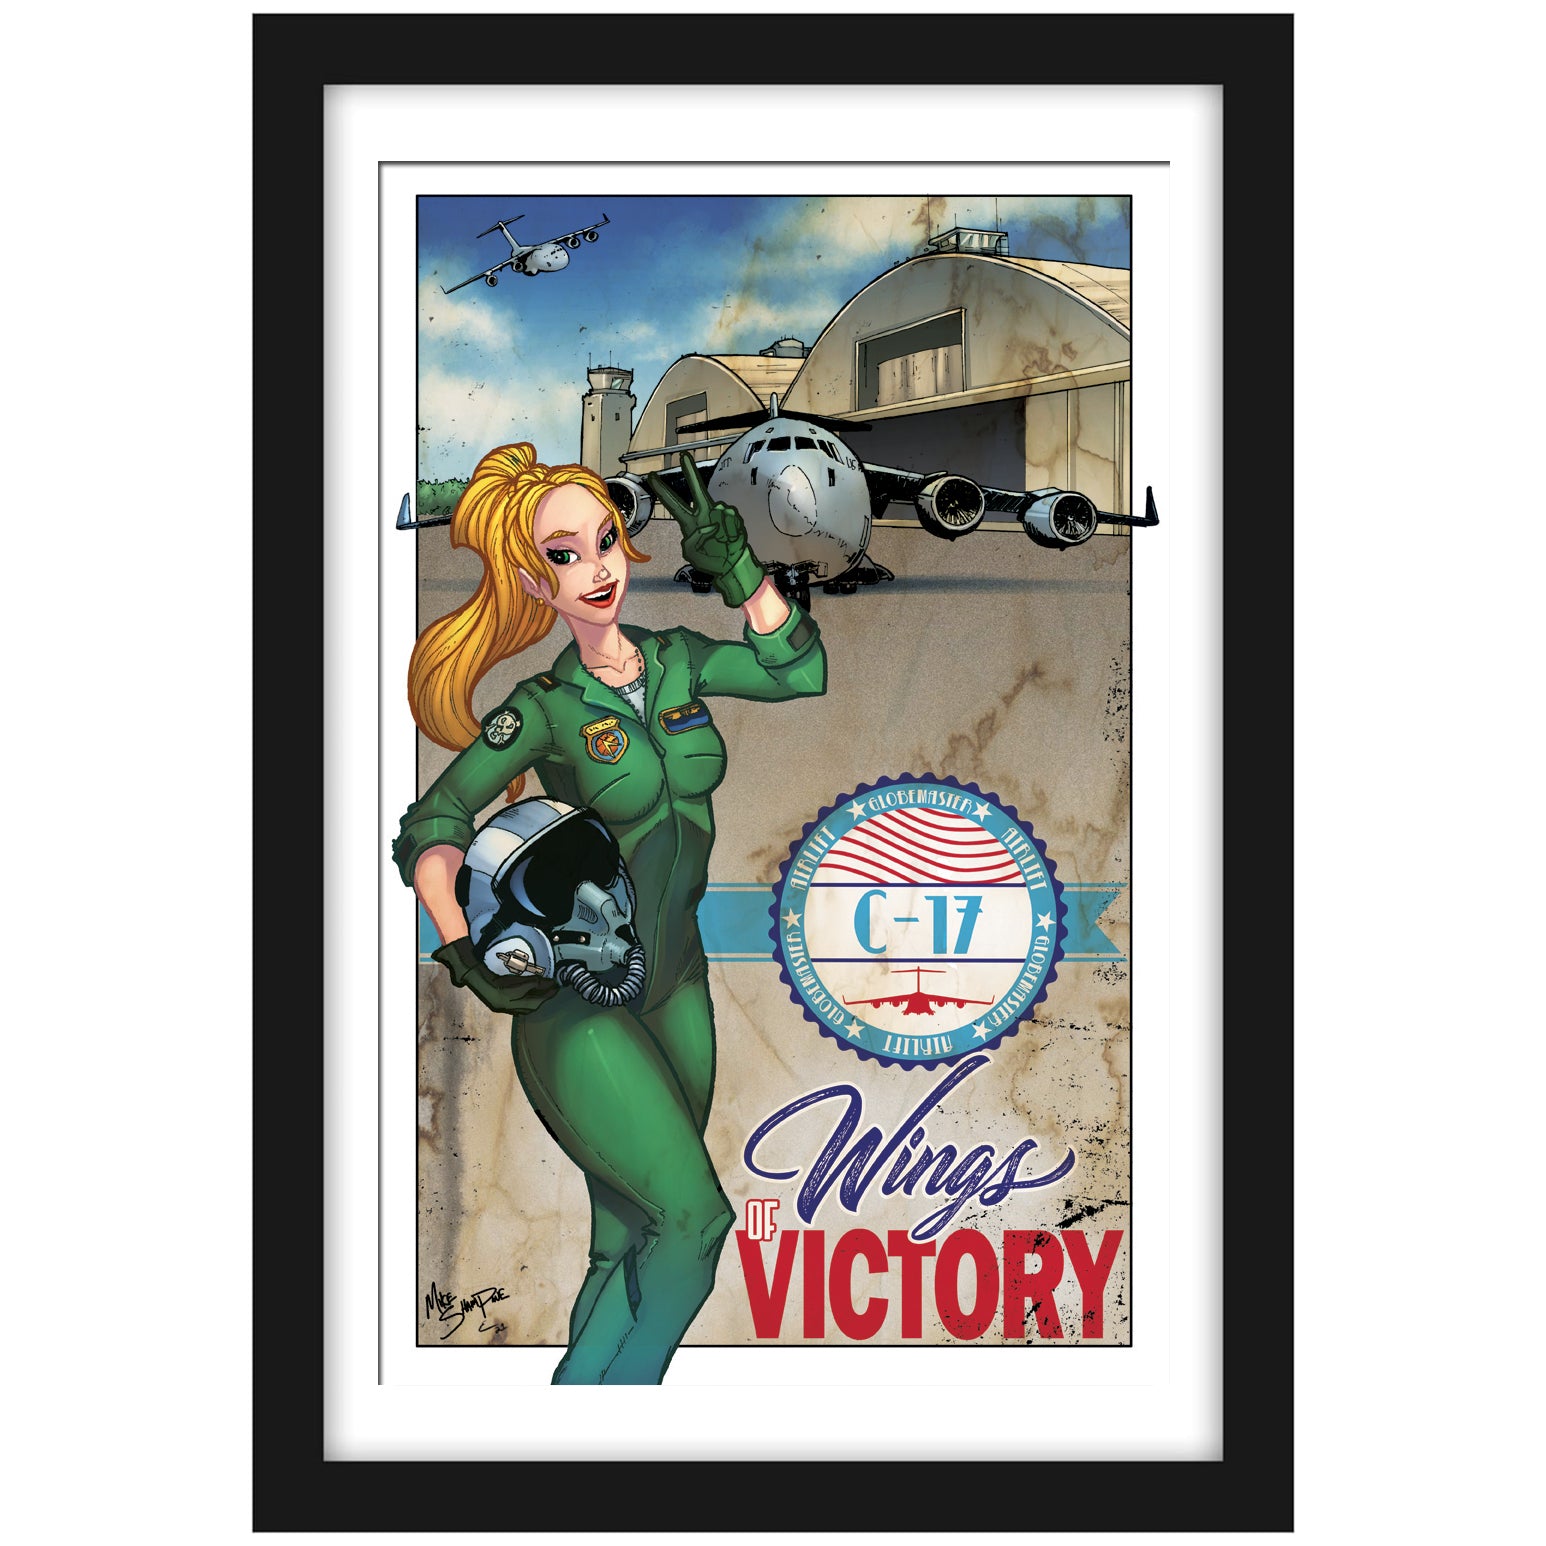 C-17 "Wings for Victory" - Vintage Print Pinup & Airplane Art by Mike Shampine - Signed and Numbered